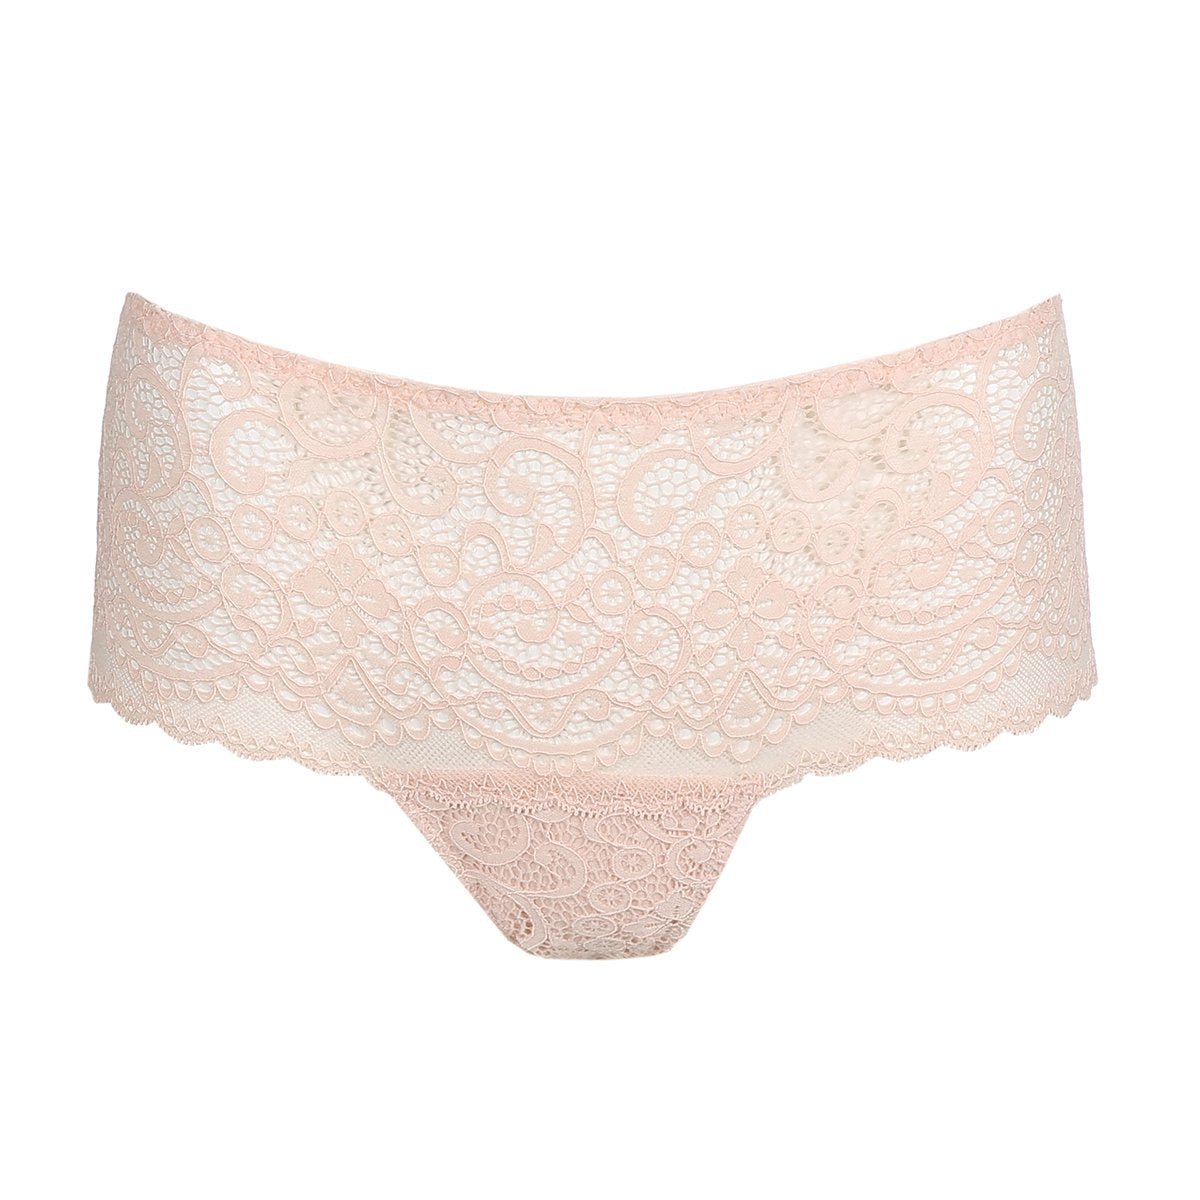 Herr Plavkin, Cool Lace Panties, Reserved for My Husband!